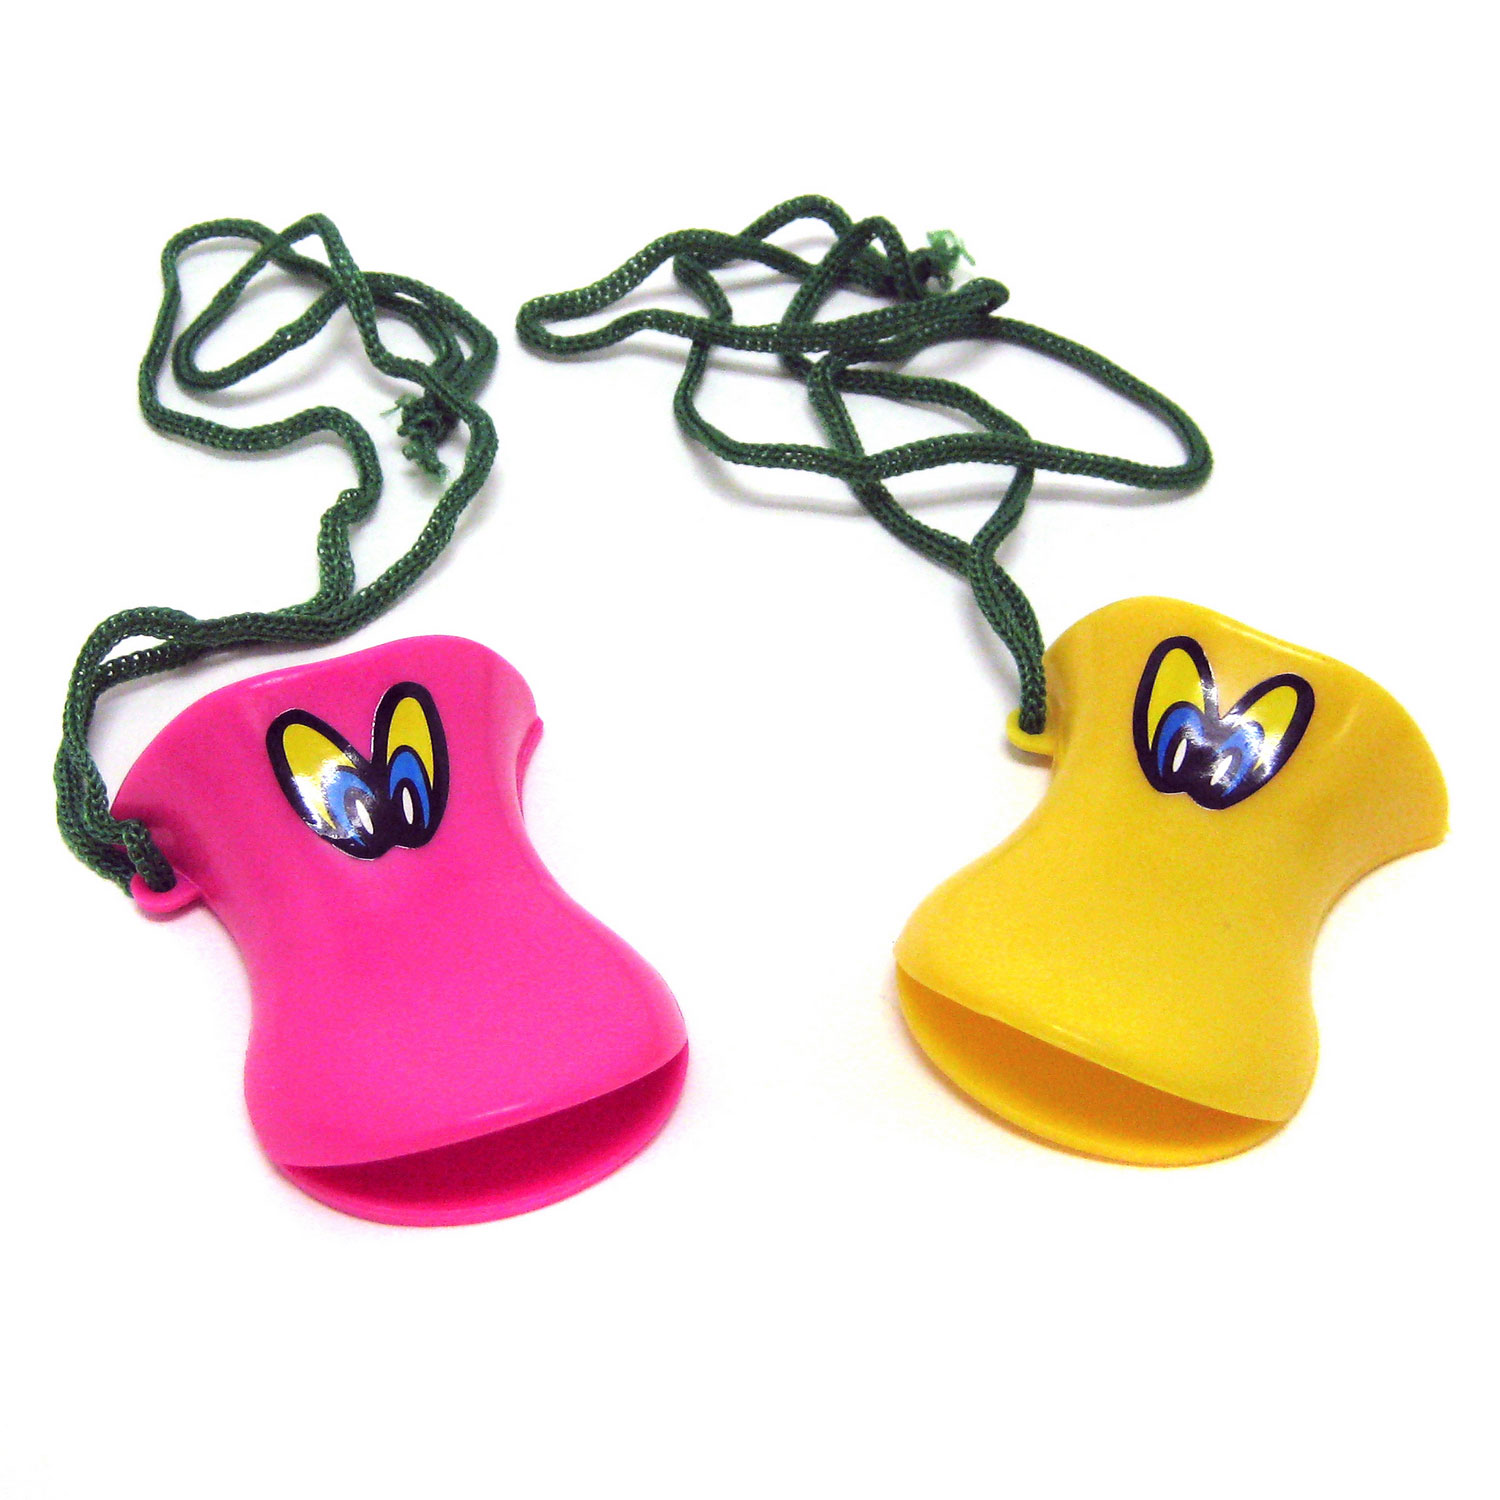 sold individually Assorted colours Plastic Whistle